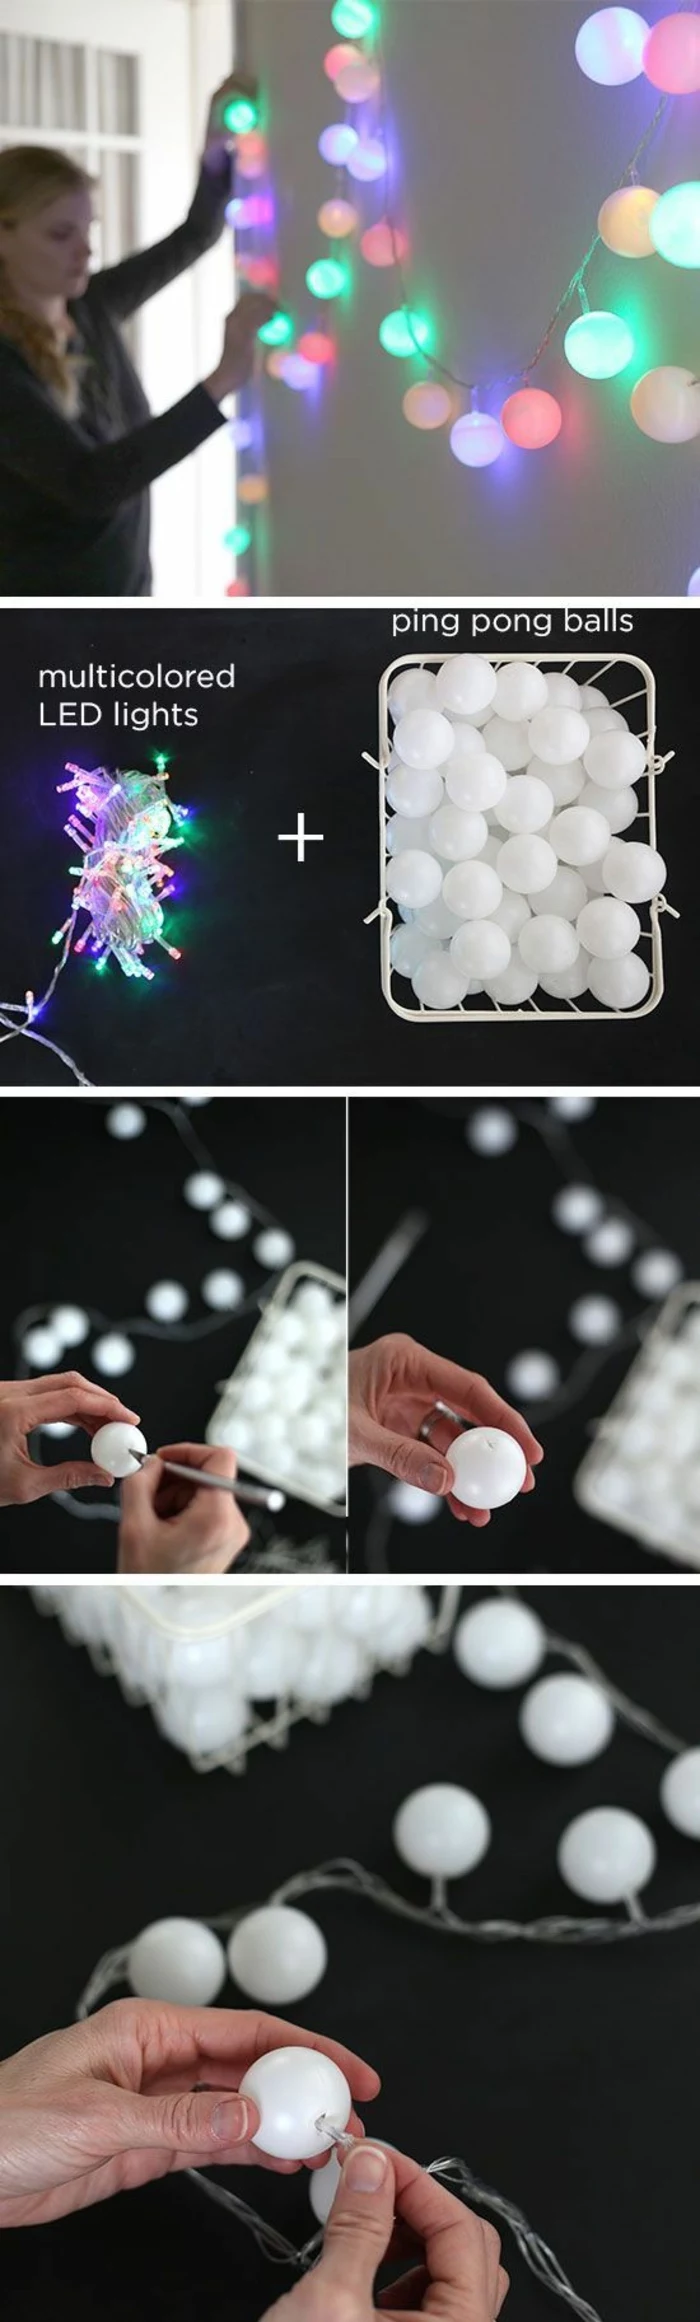 ping pong balls, fairy lights, fun diy projects, diy tutorial, step by step